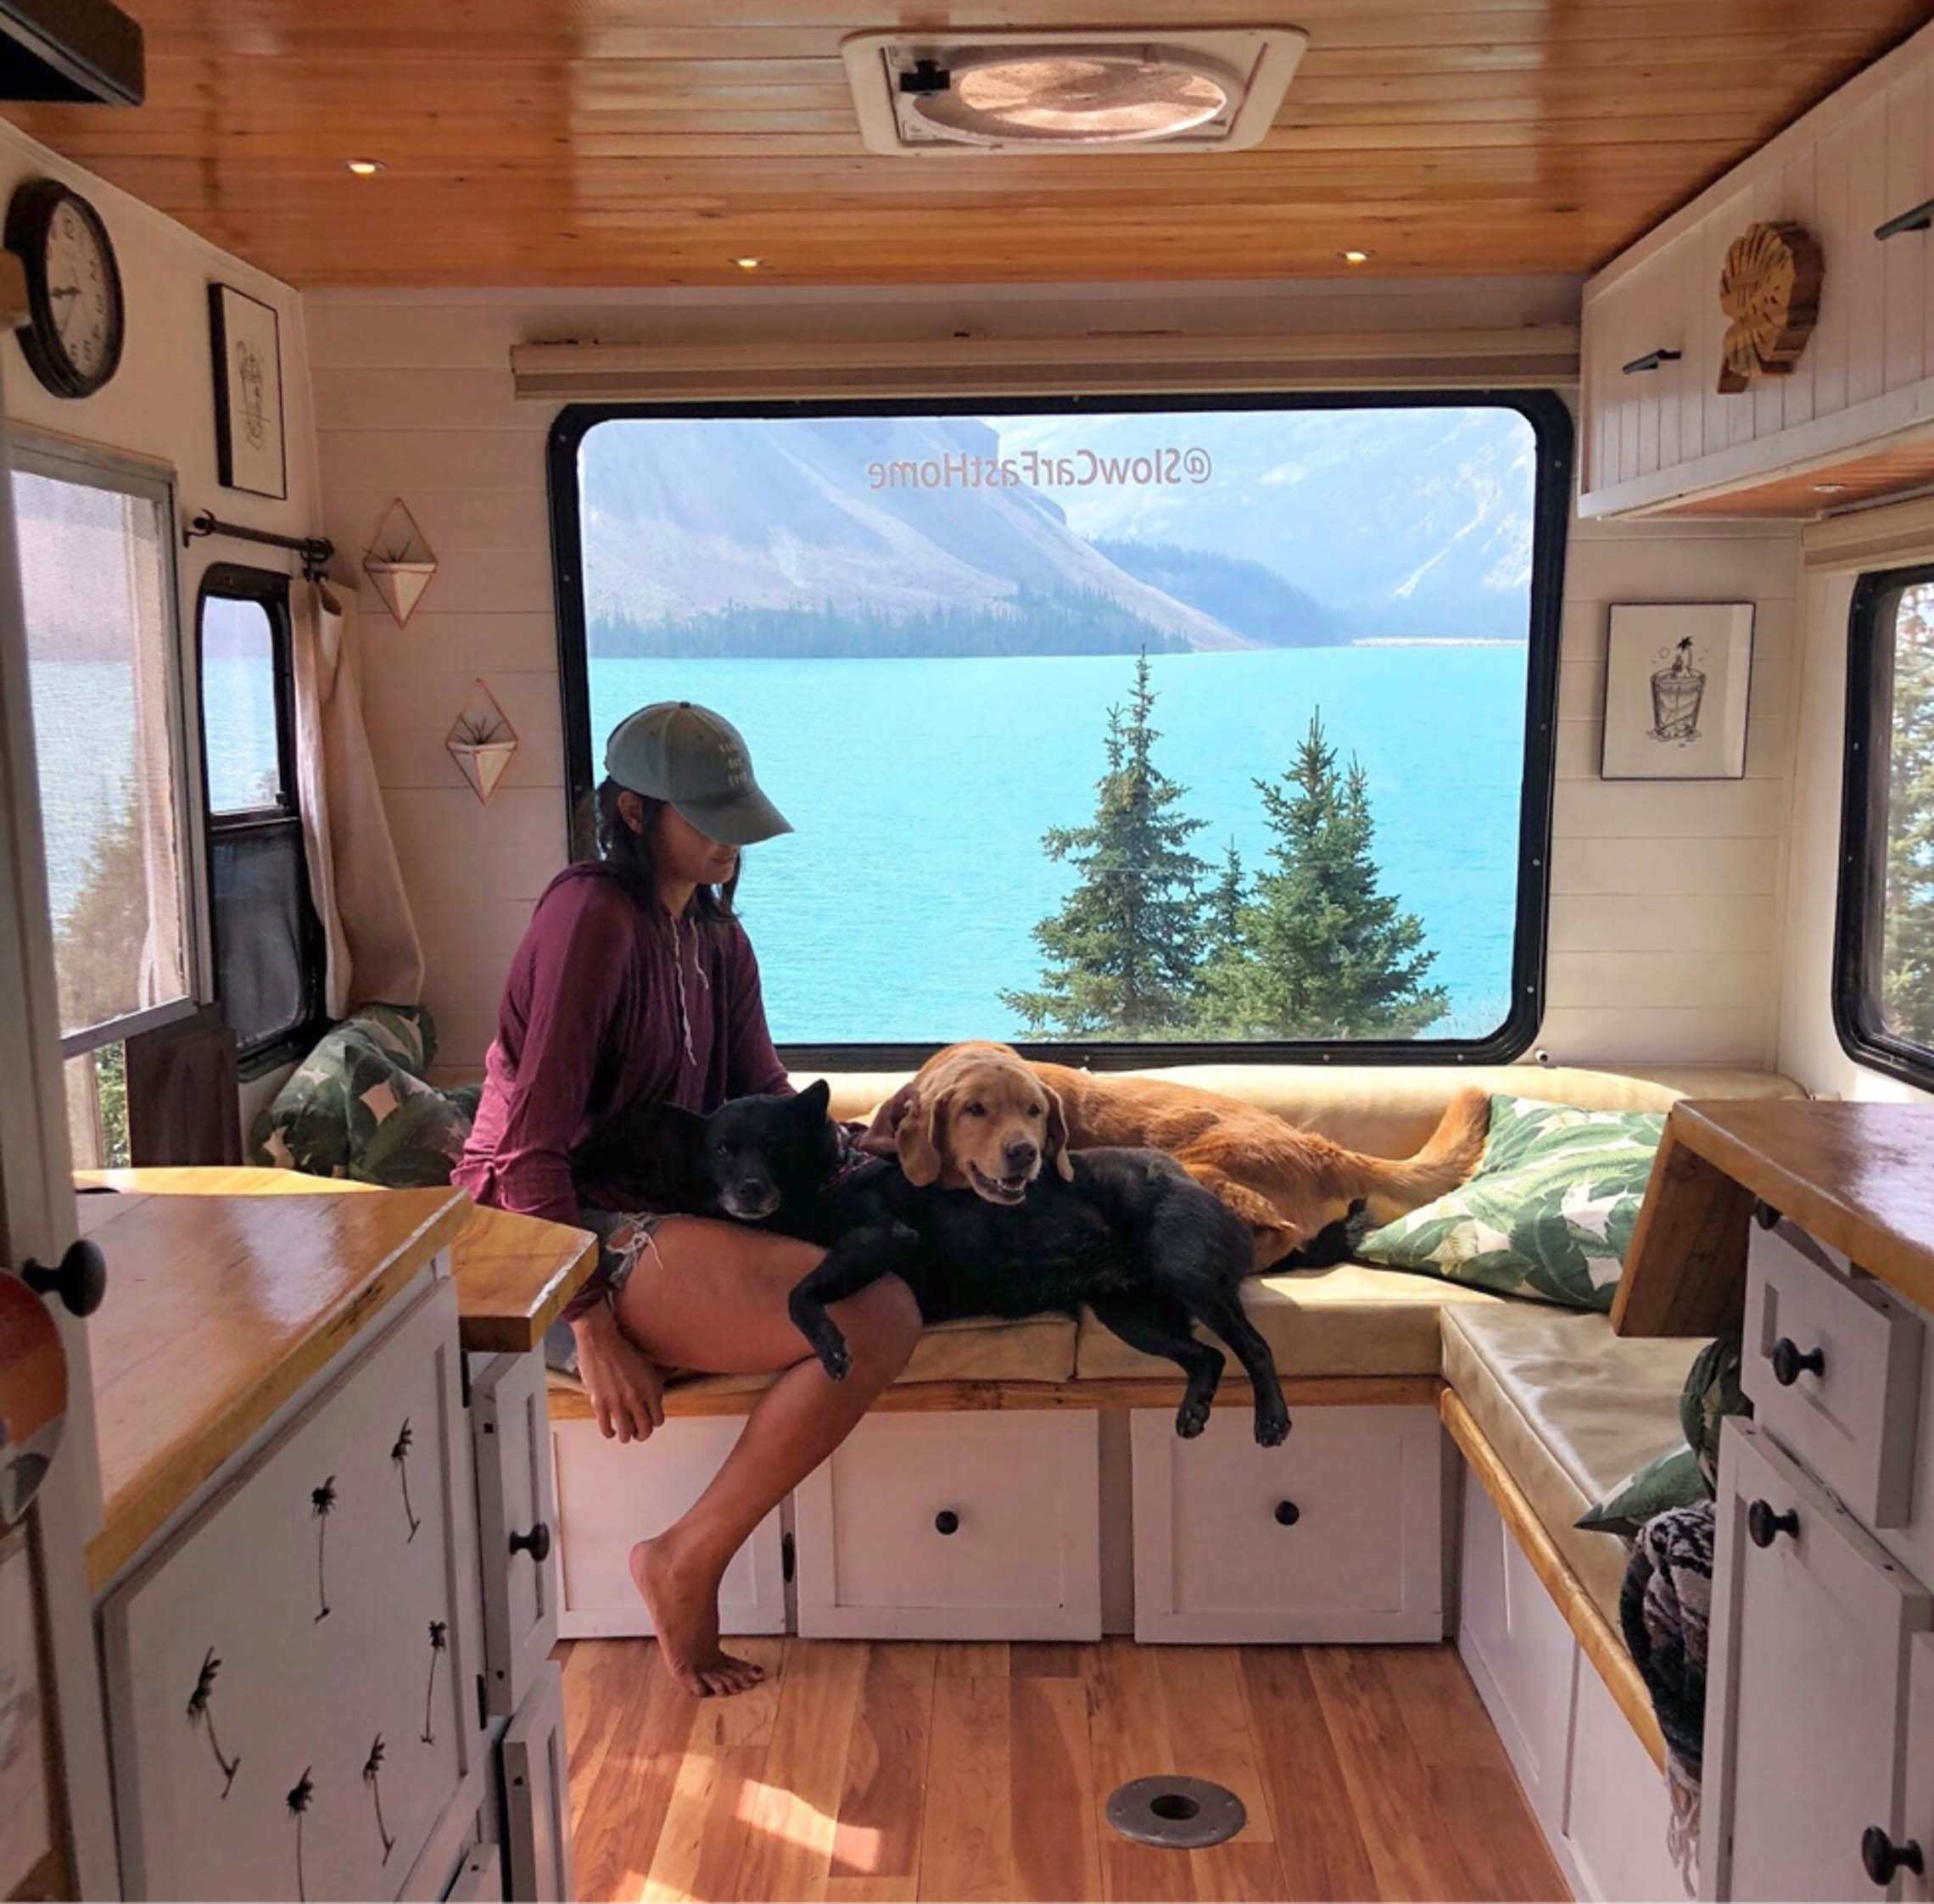 woman and dog sitting in front of window in a van looking out to a lake